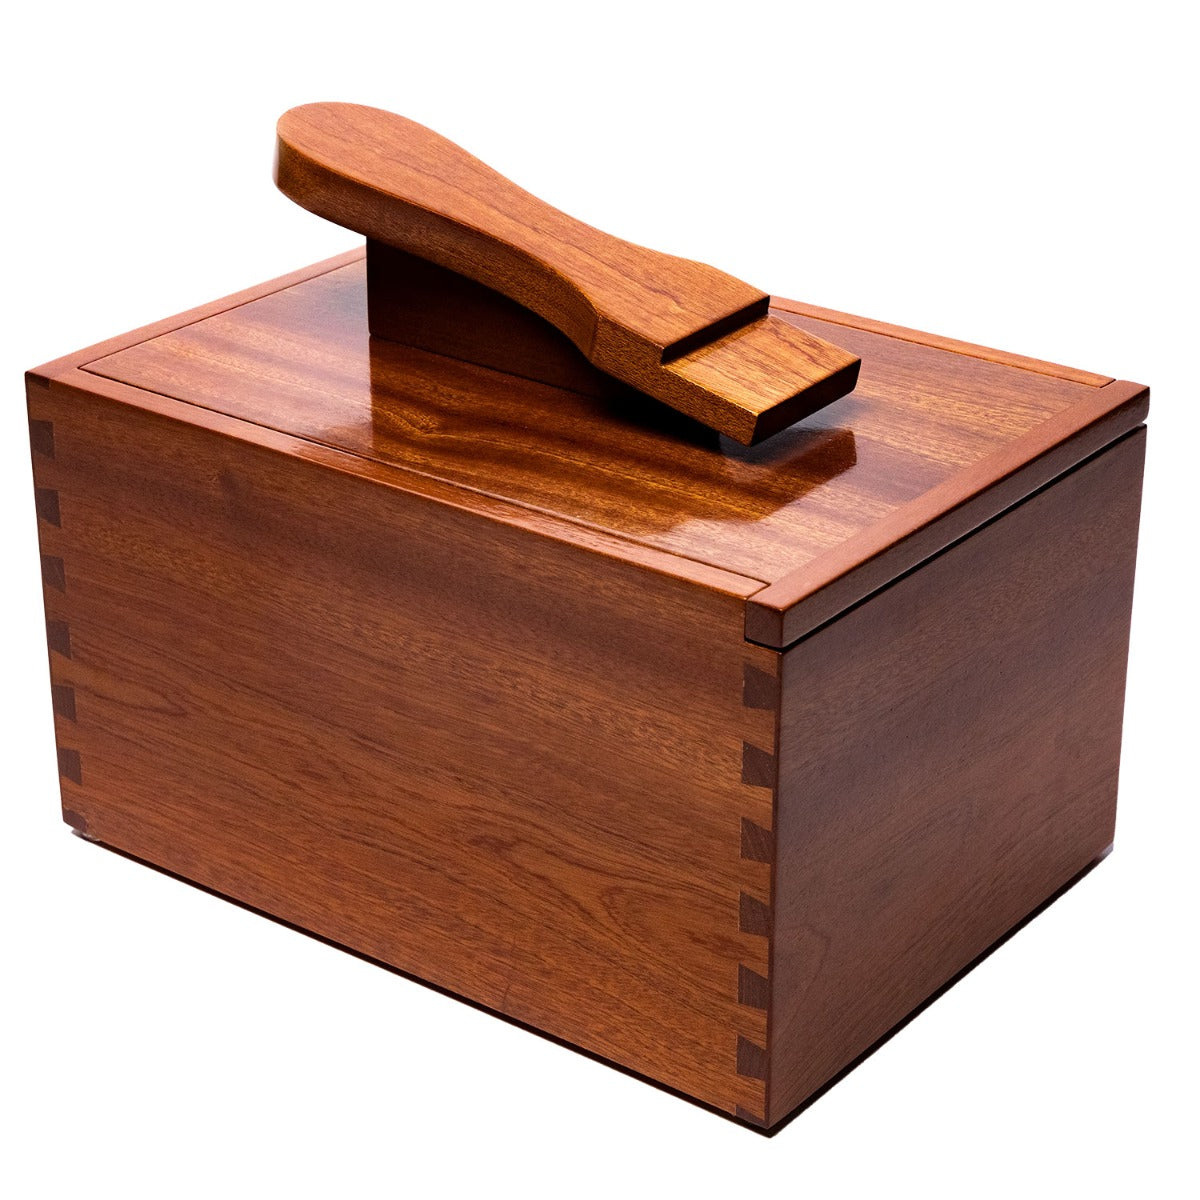 KirbyAllison.com's Deluxe Walnut Shoeshine Valet: A solid walnut wood box with a wooden handle on top.